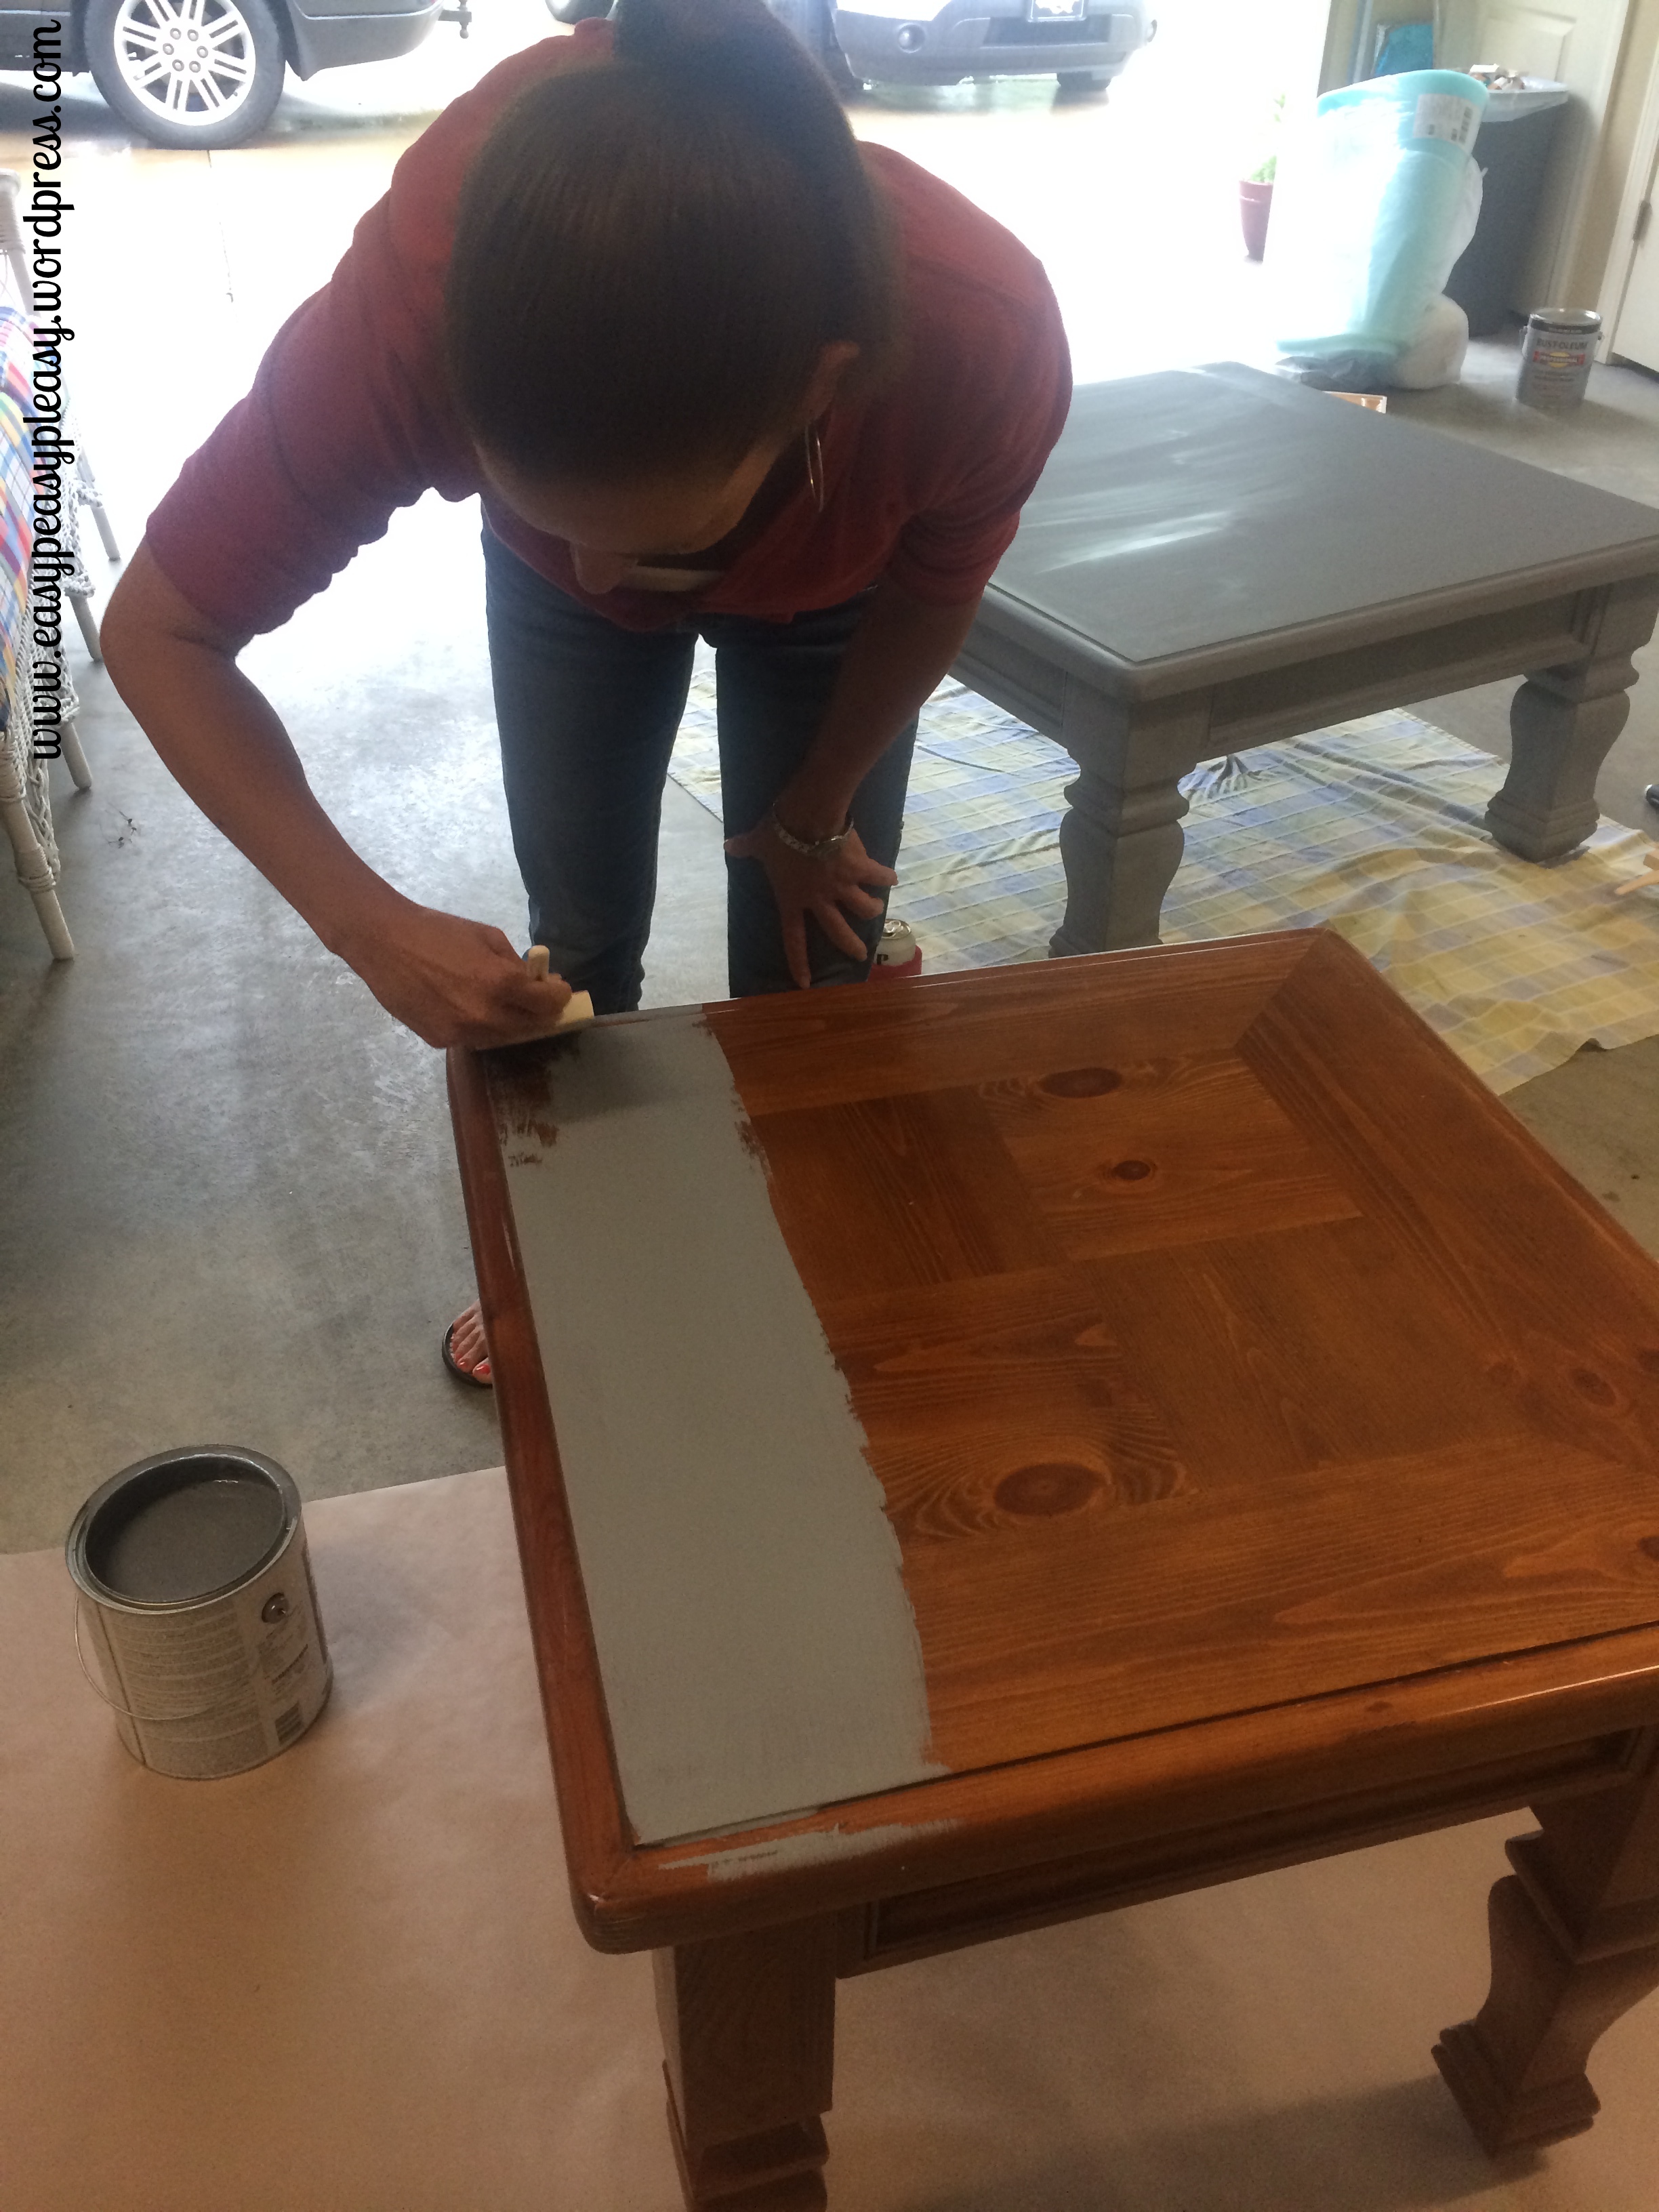 Painting cover stain primer as a base coat on furniture so no sanding would be needed.